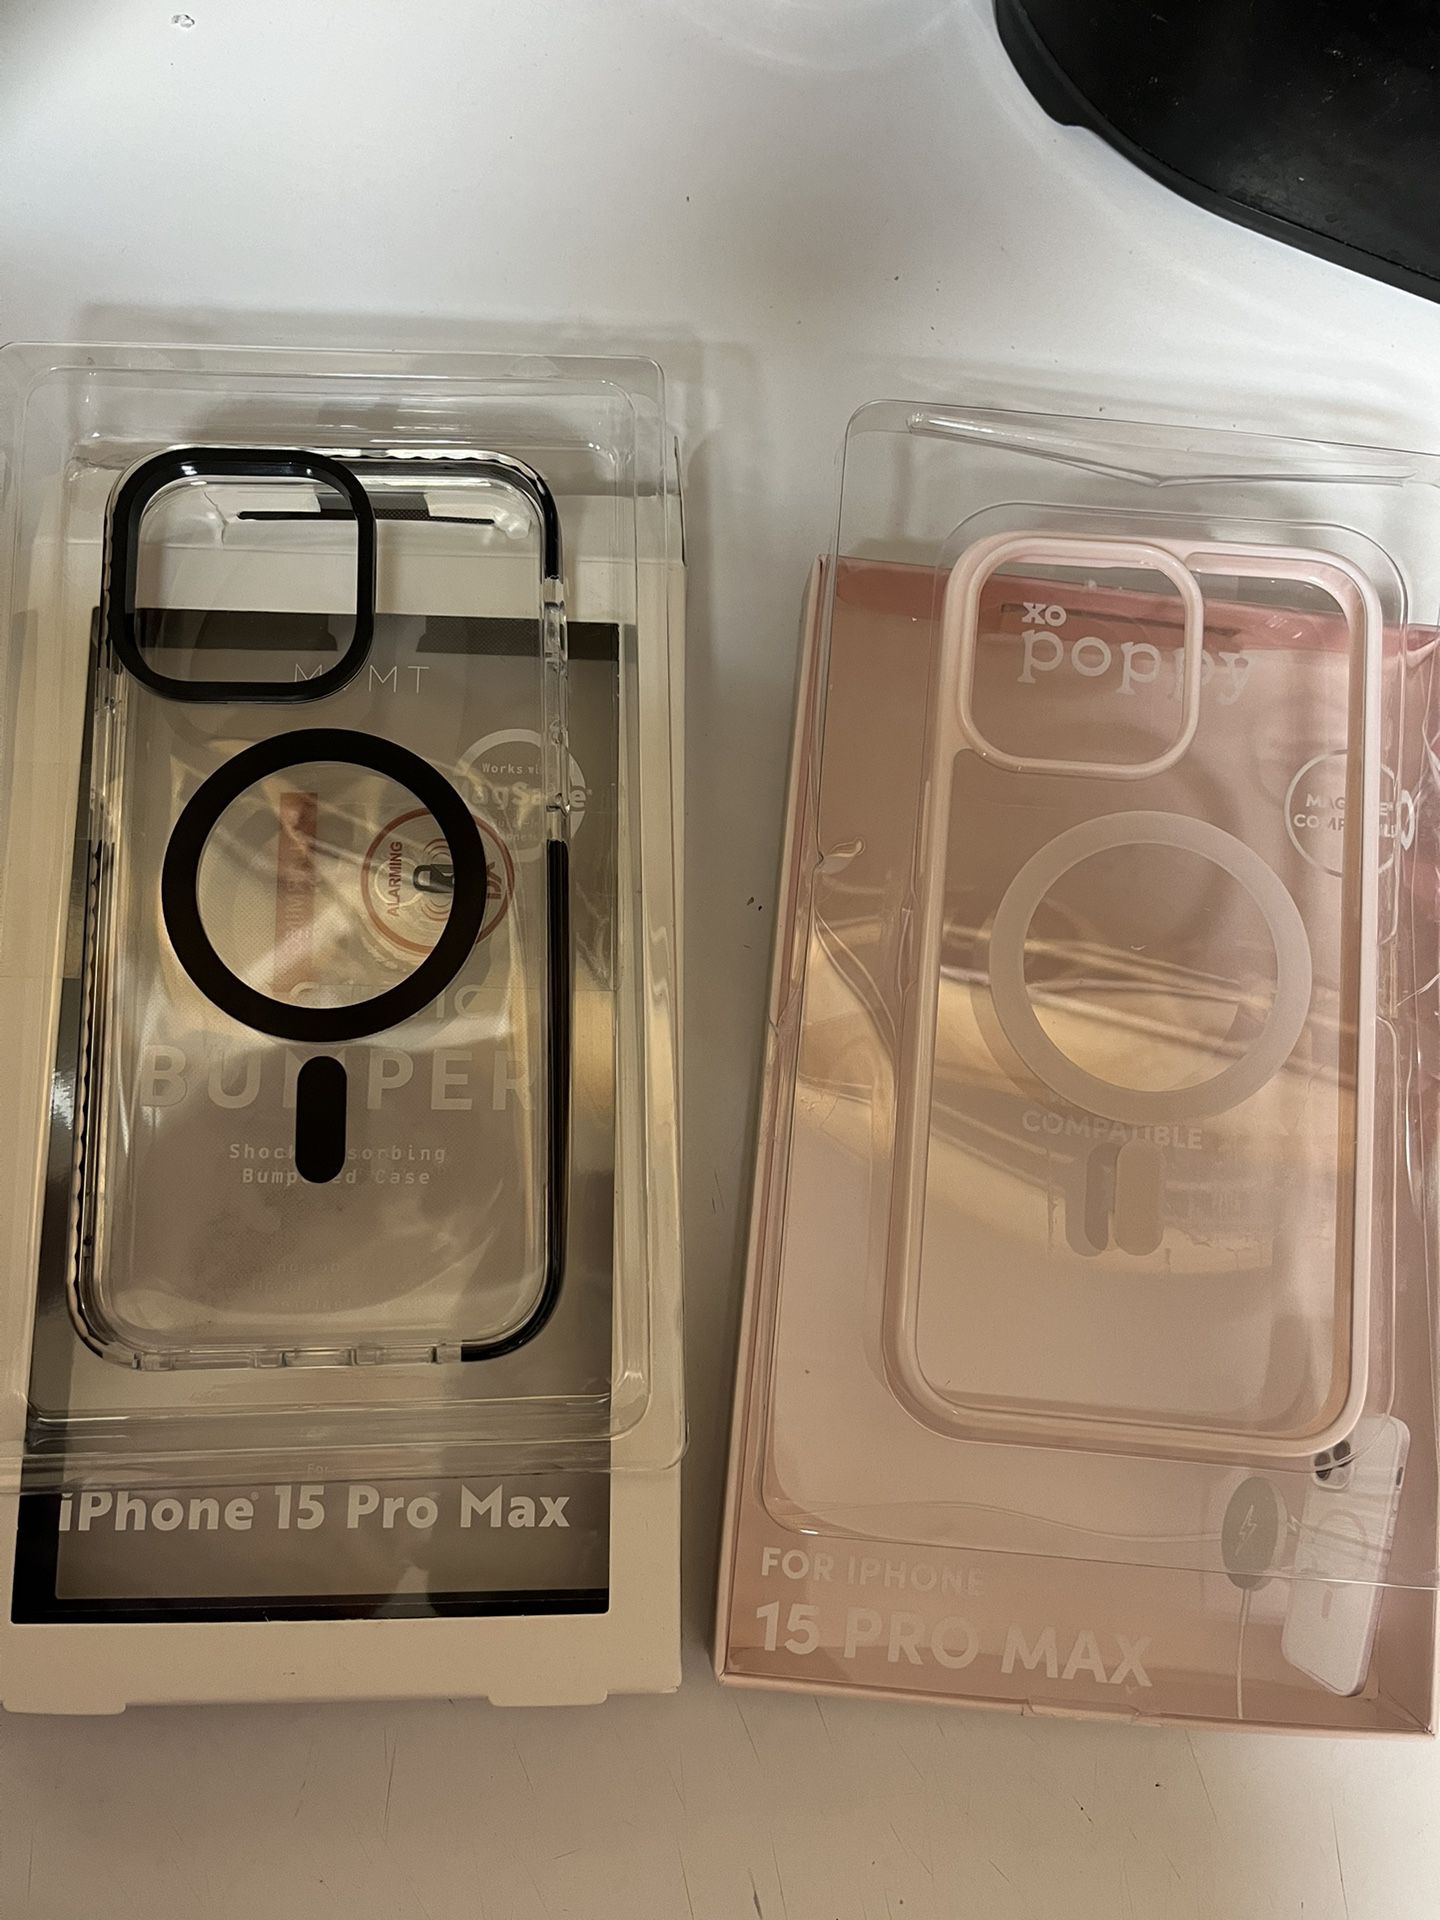 iPhone 15 Pro Max Cases $10 Each